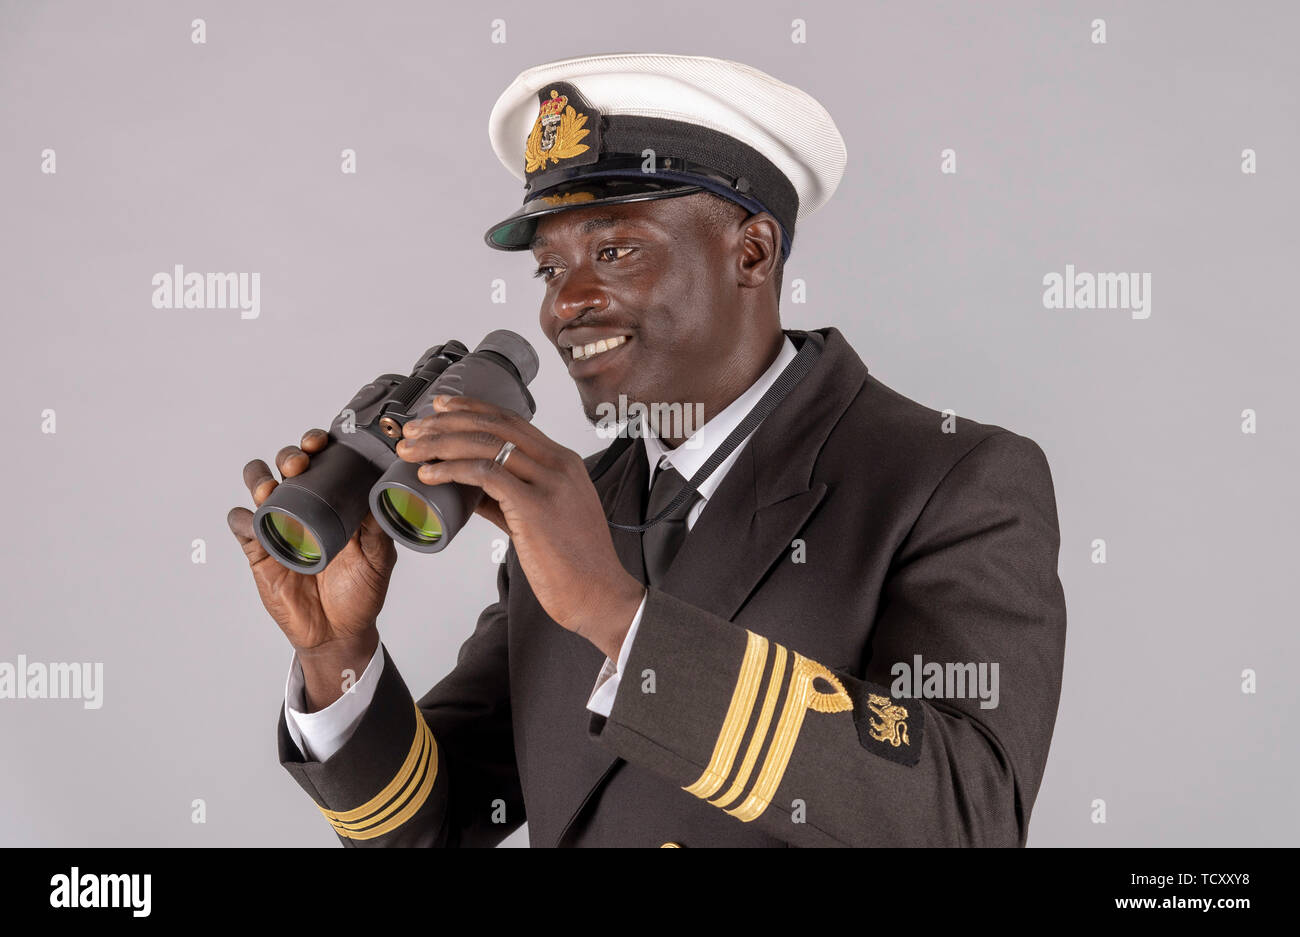 England, UK. May 2019. A naval officer in uniform holding a pair of binoculars Stock Photo